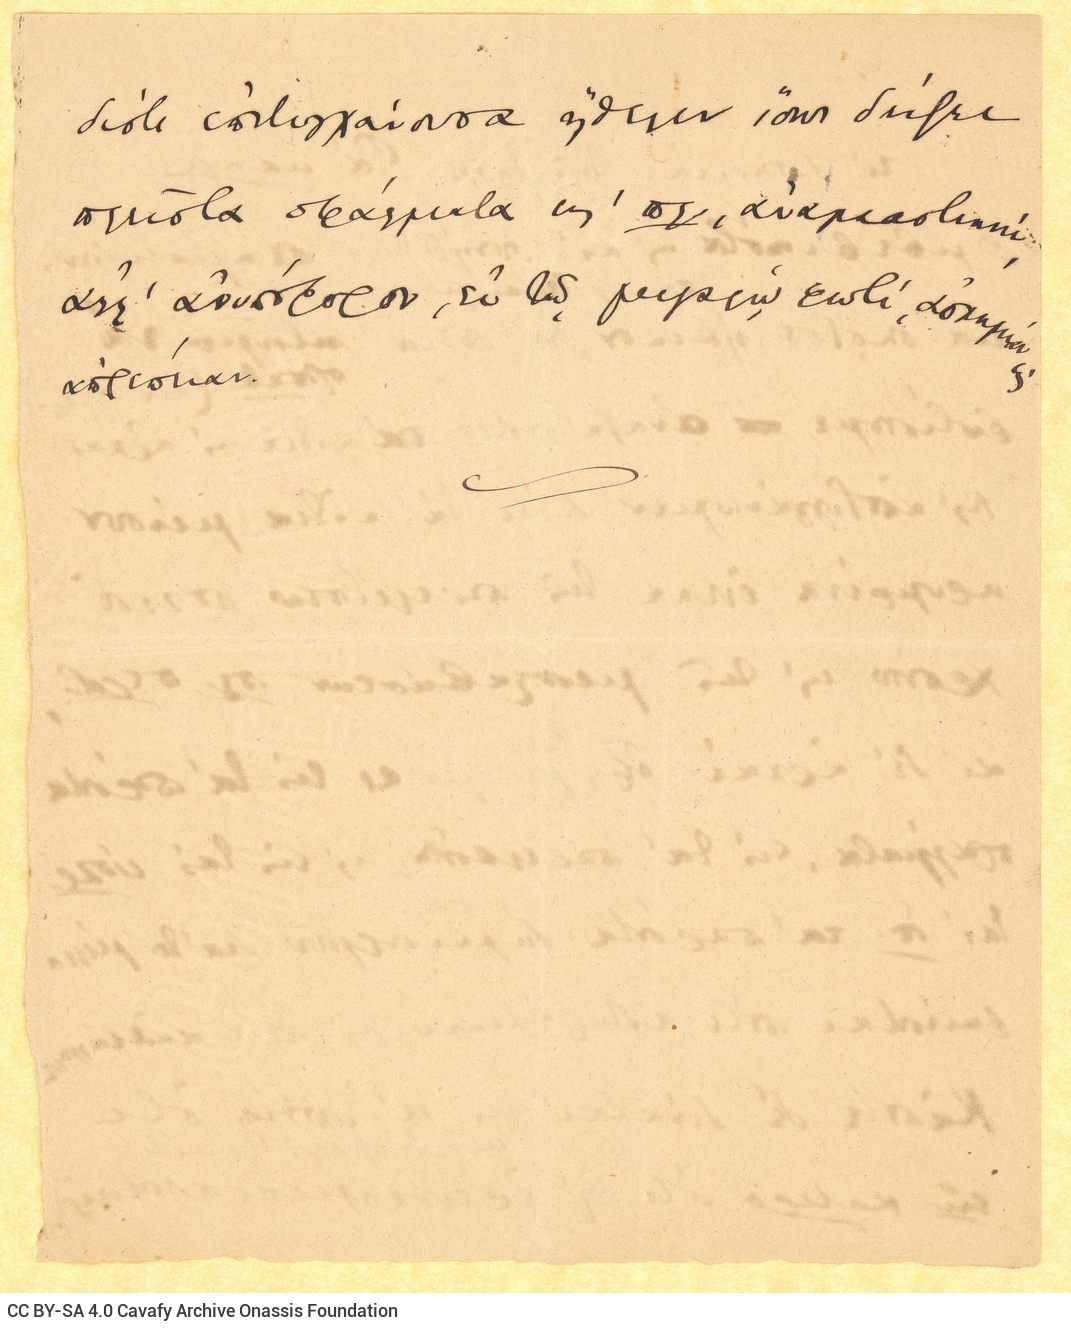 Handwritten notes on the poem "The Windows" in ink, on both sides of a sheet of paper. The title is written and underlined